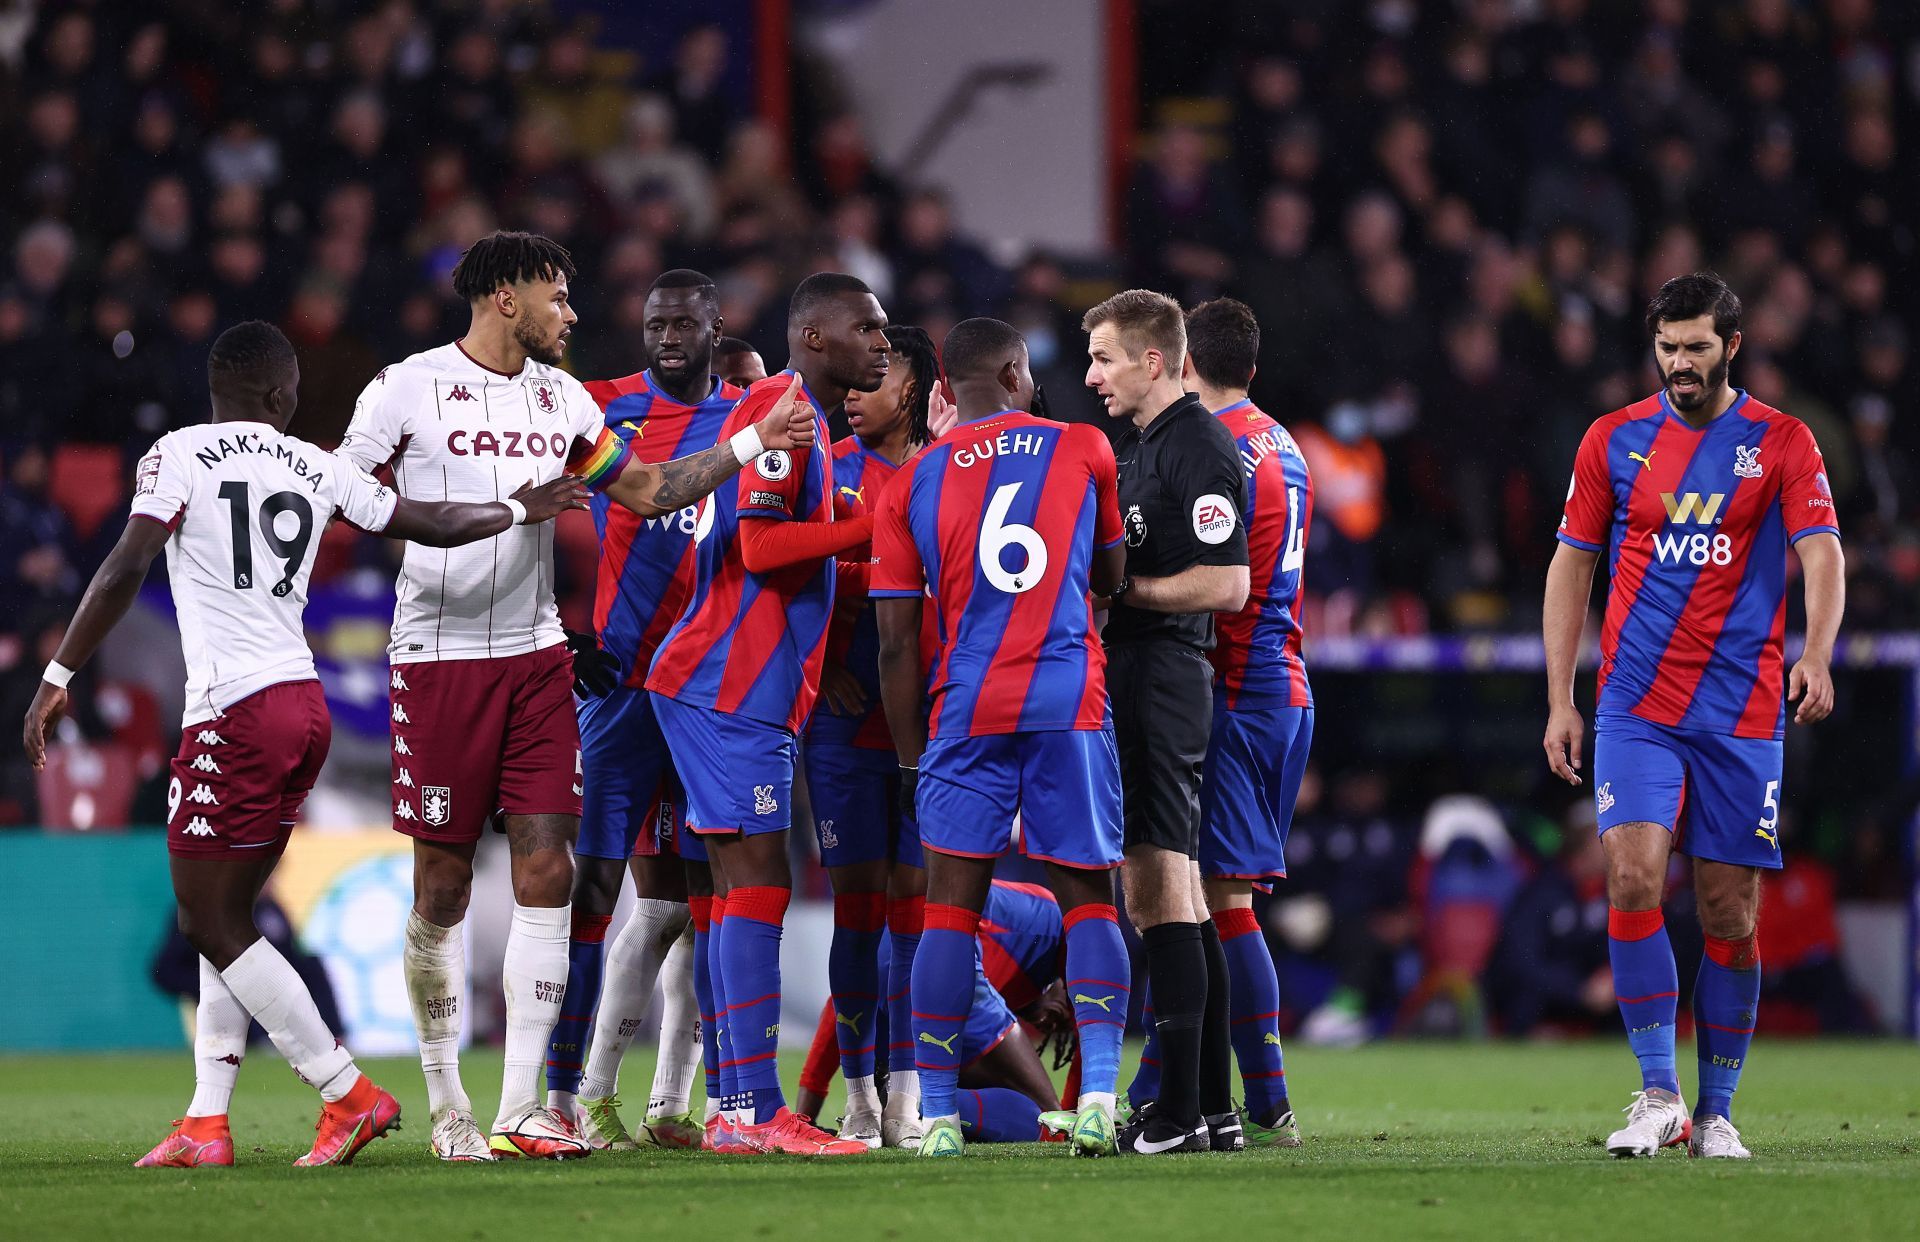 Aston Villa and Crystal Palace square off on Sunday